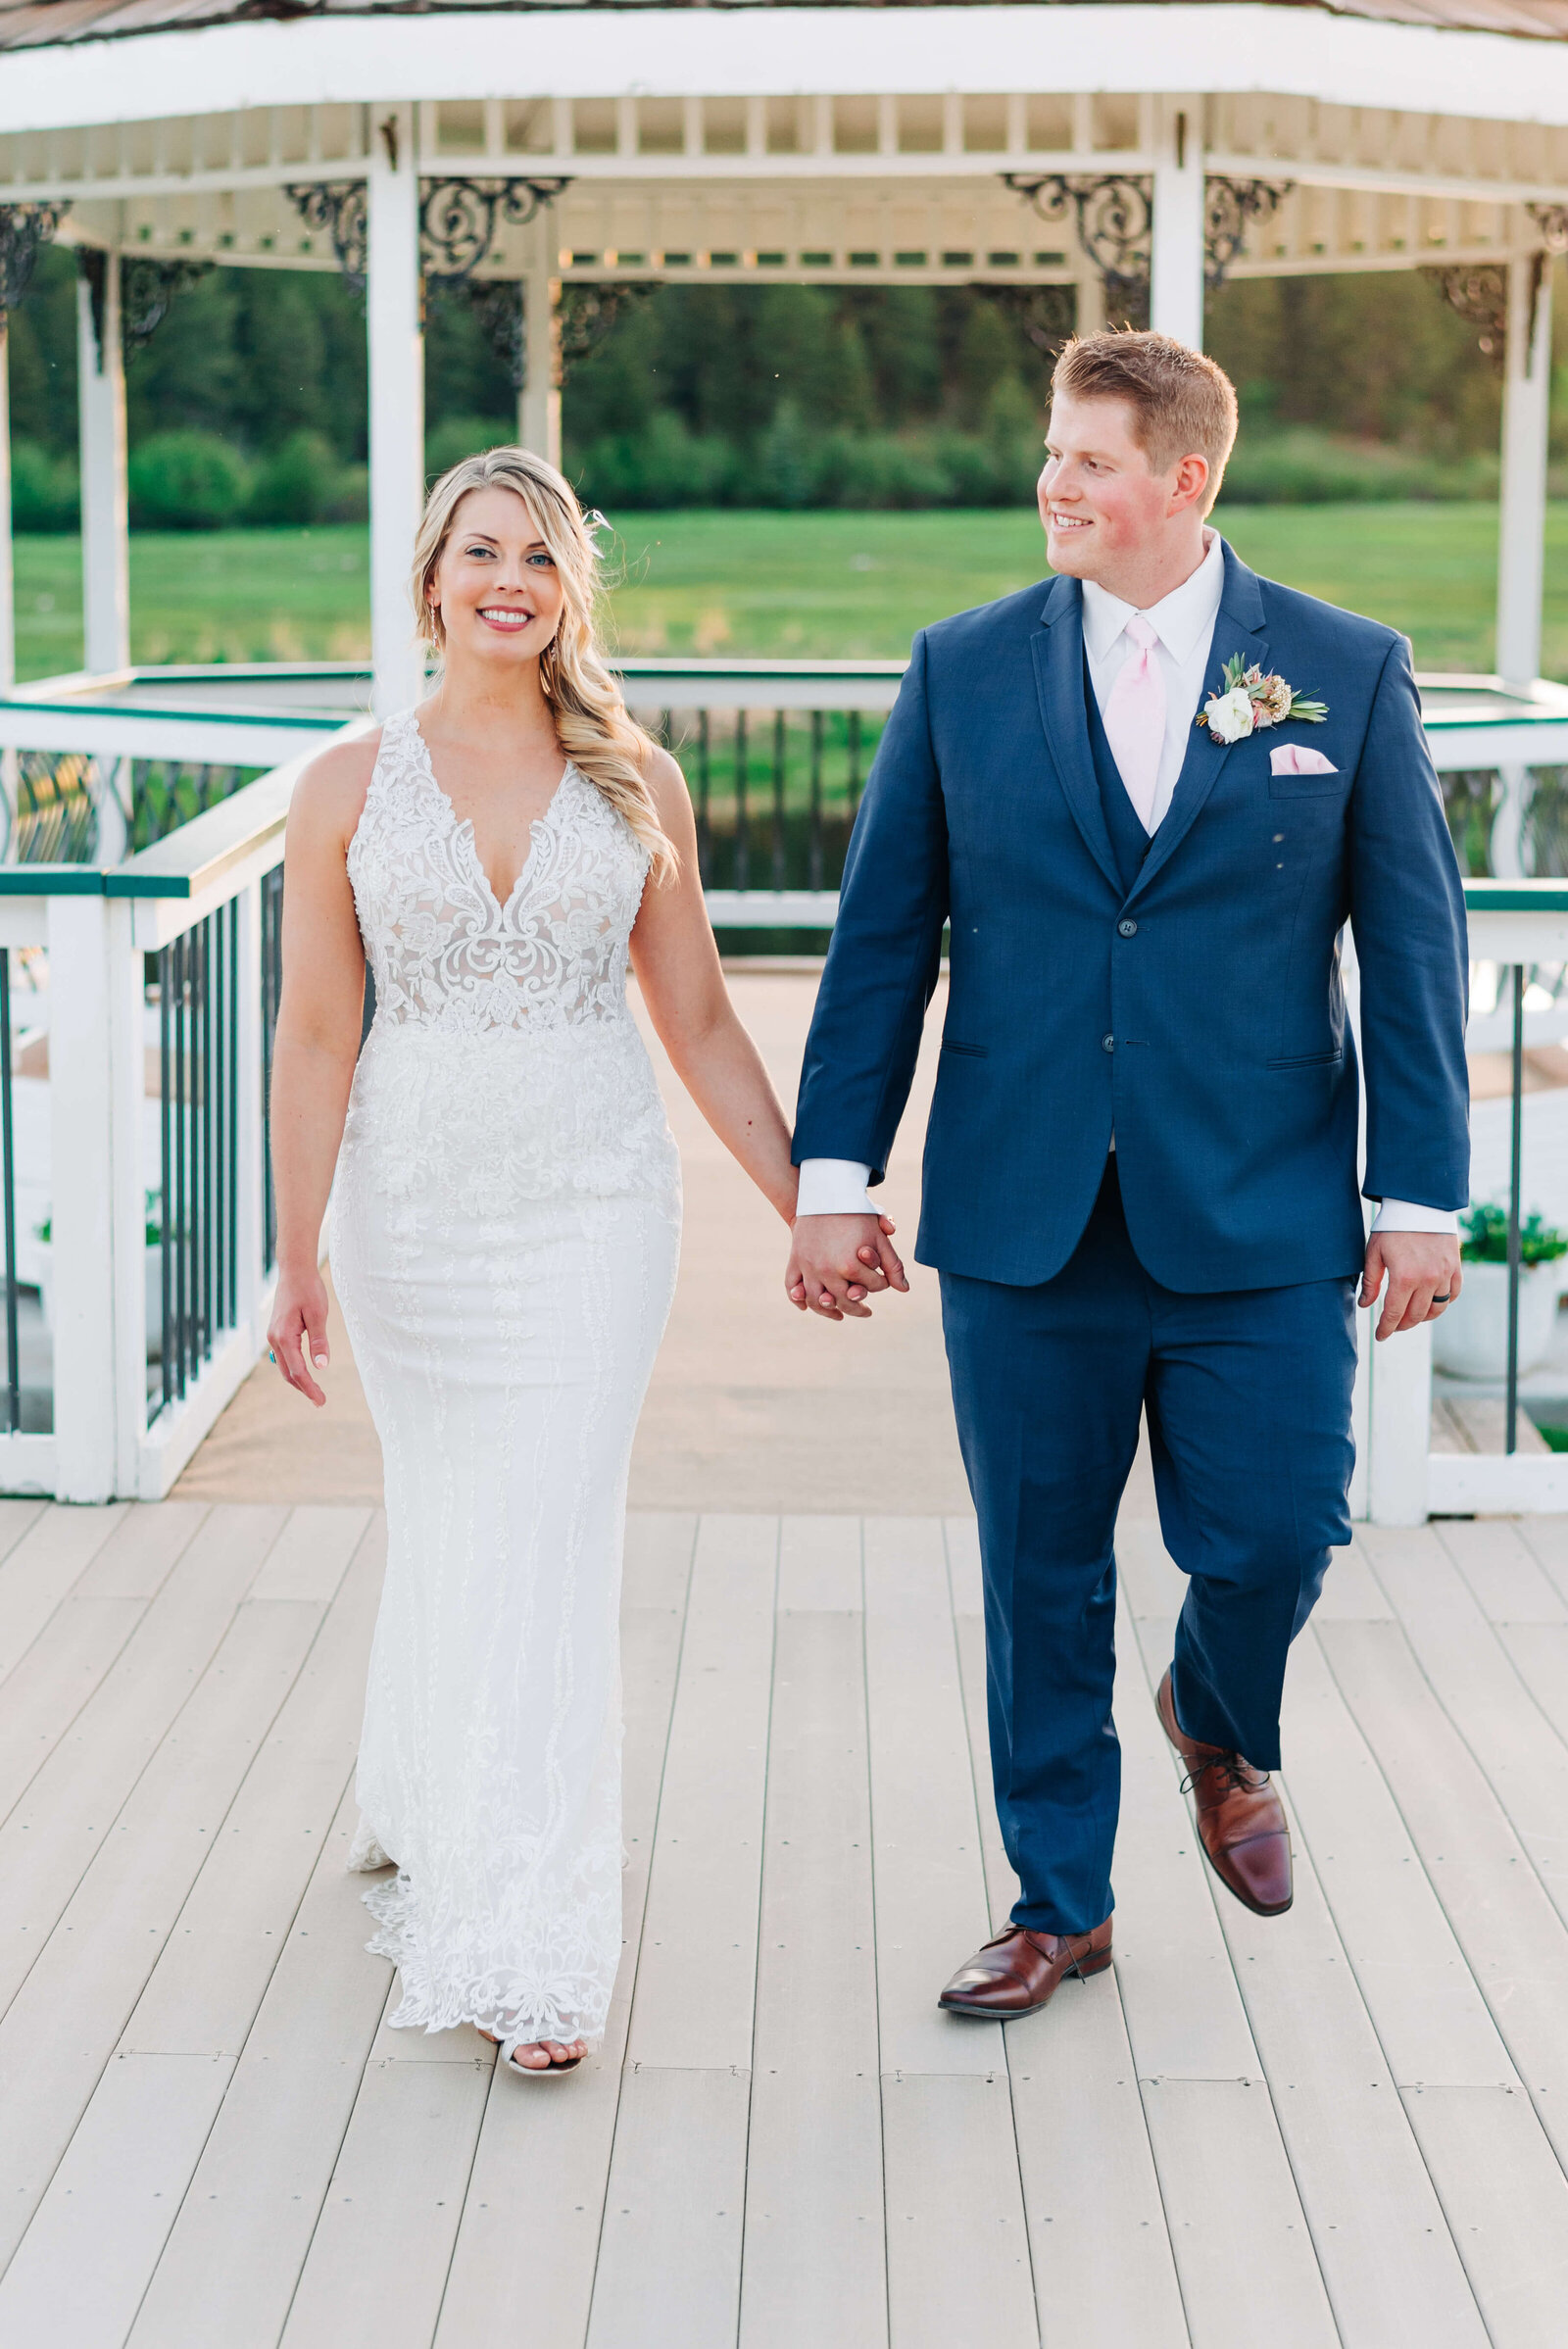 Virginia wedding photographer takes an image of a newly married couple walking together on a white bridge and smiling at the camera